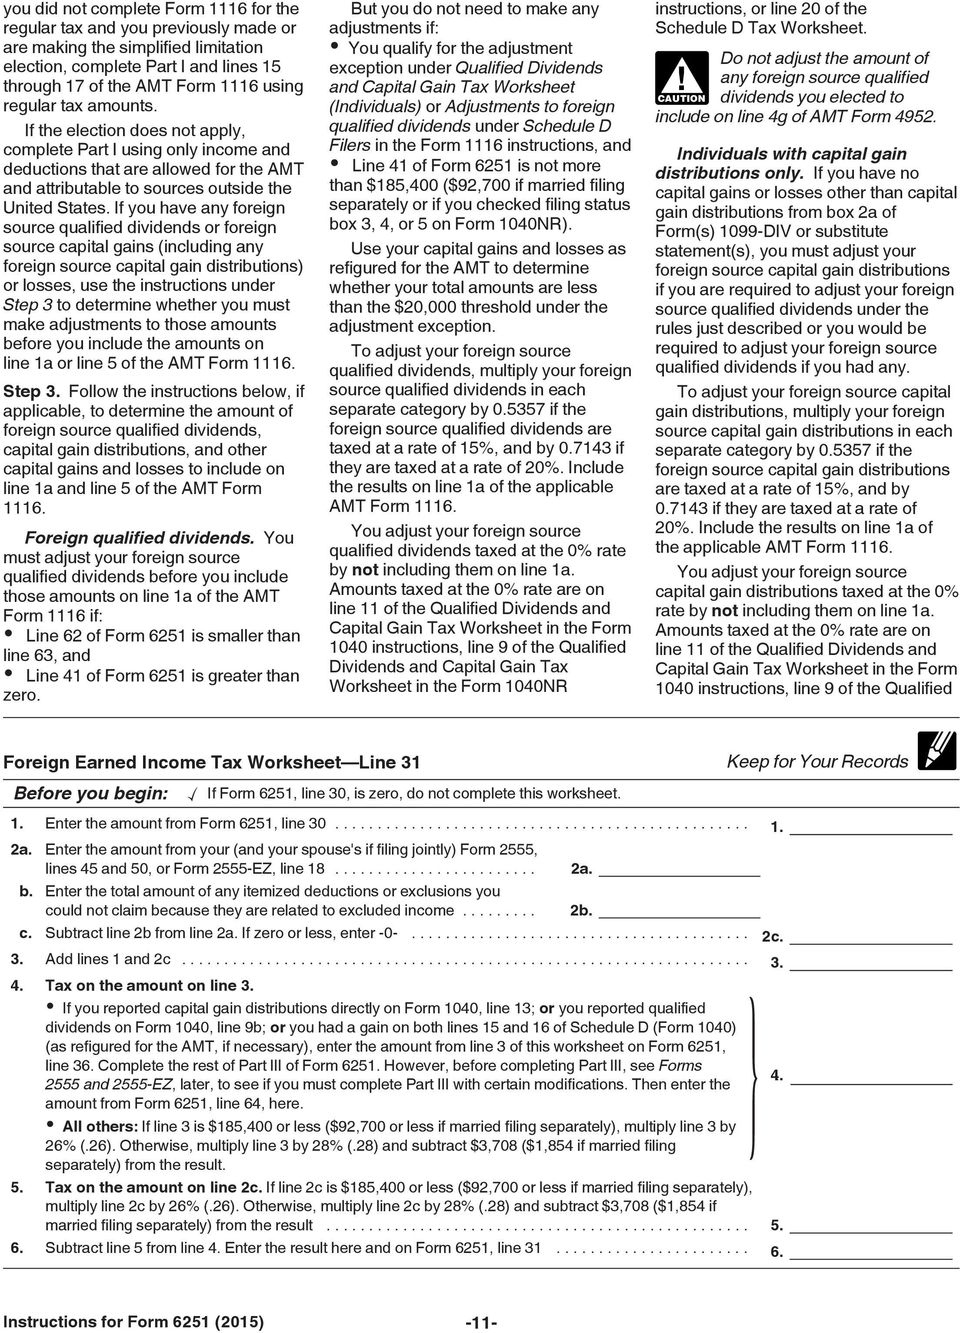 Instructions for form pdf free download.